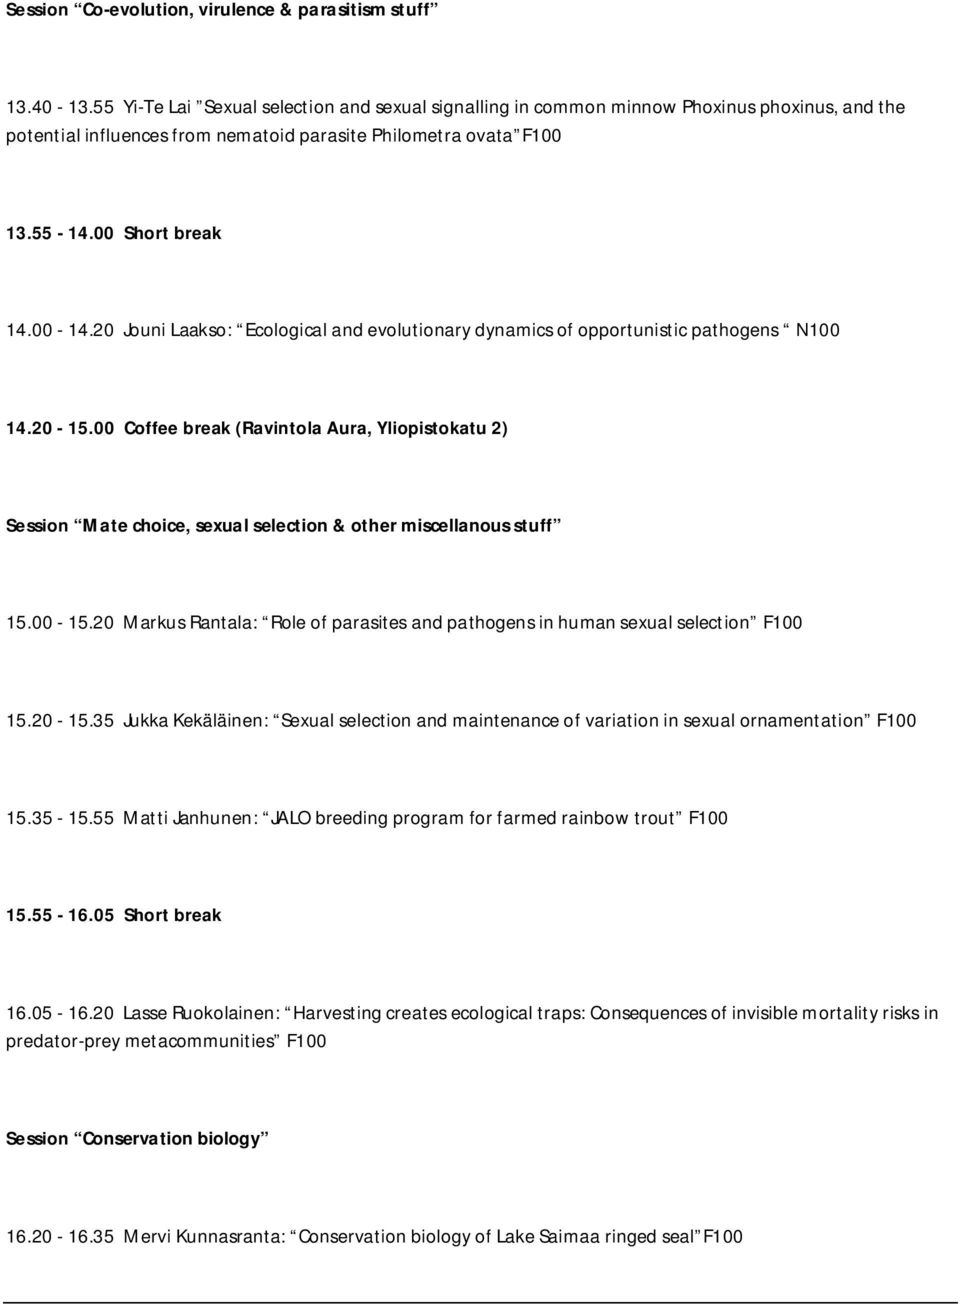 20 Jouni Laakso: Ecological and evolutionary dynamics of opportunistic pathogens N100 14.20-15.